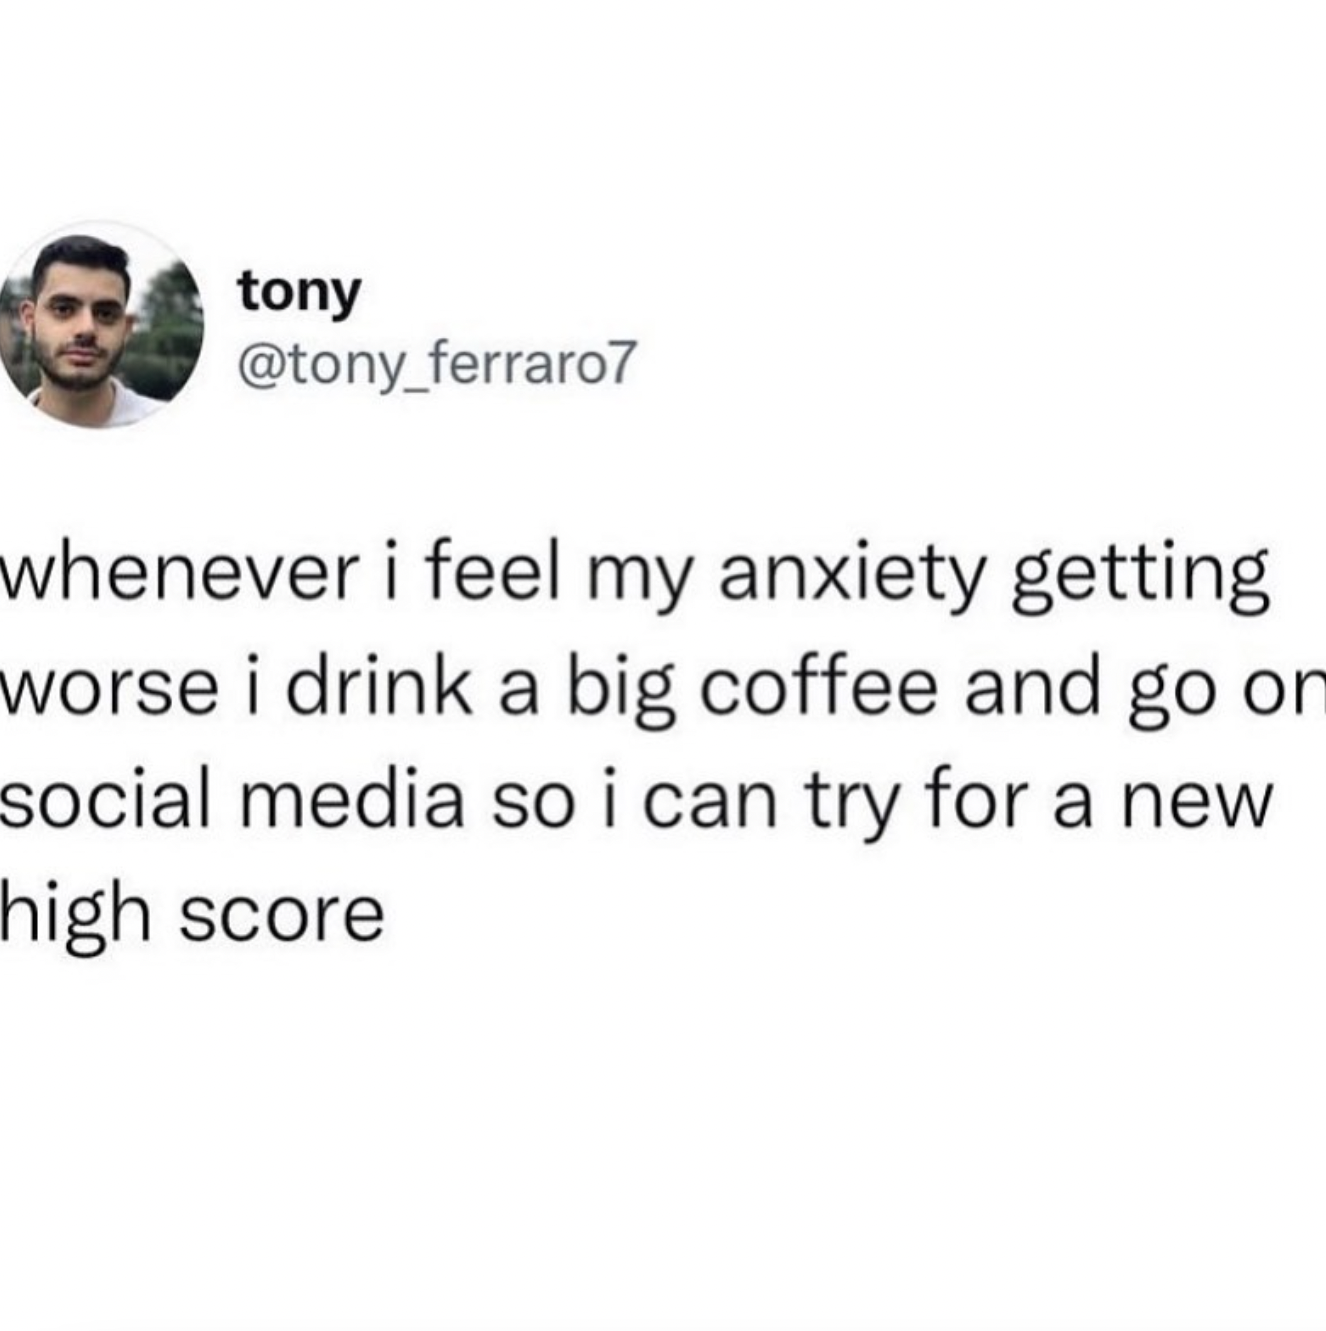 whenever i feel my anxiety getting worse I drink a big coffee and go on social media so i can try for a new high score